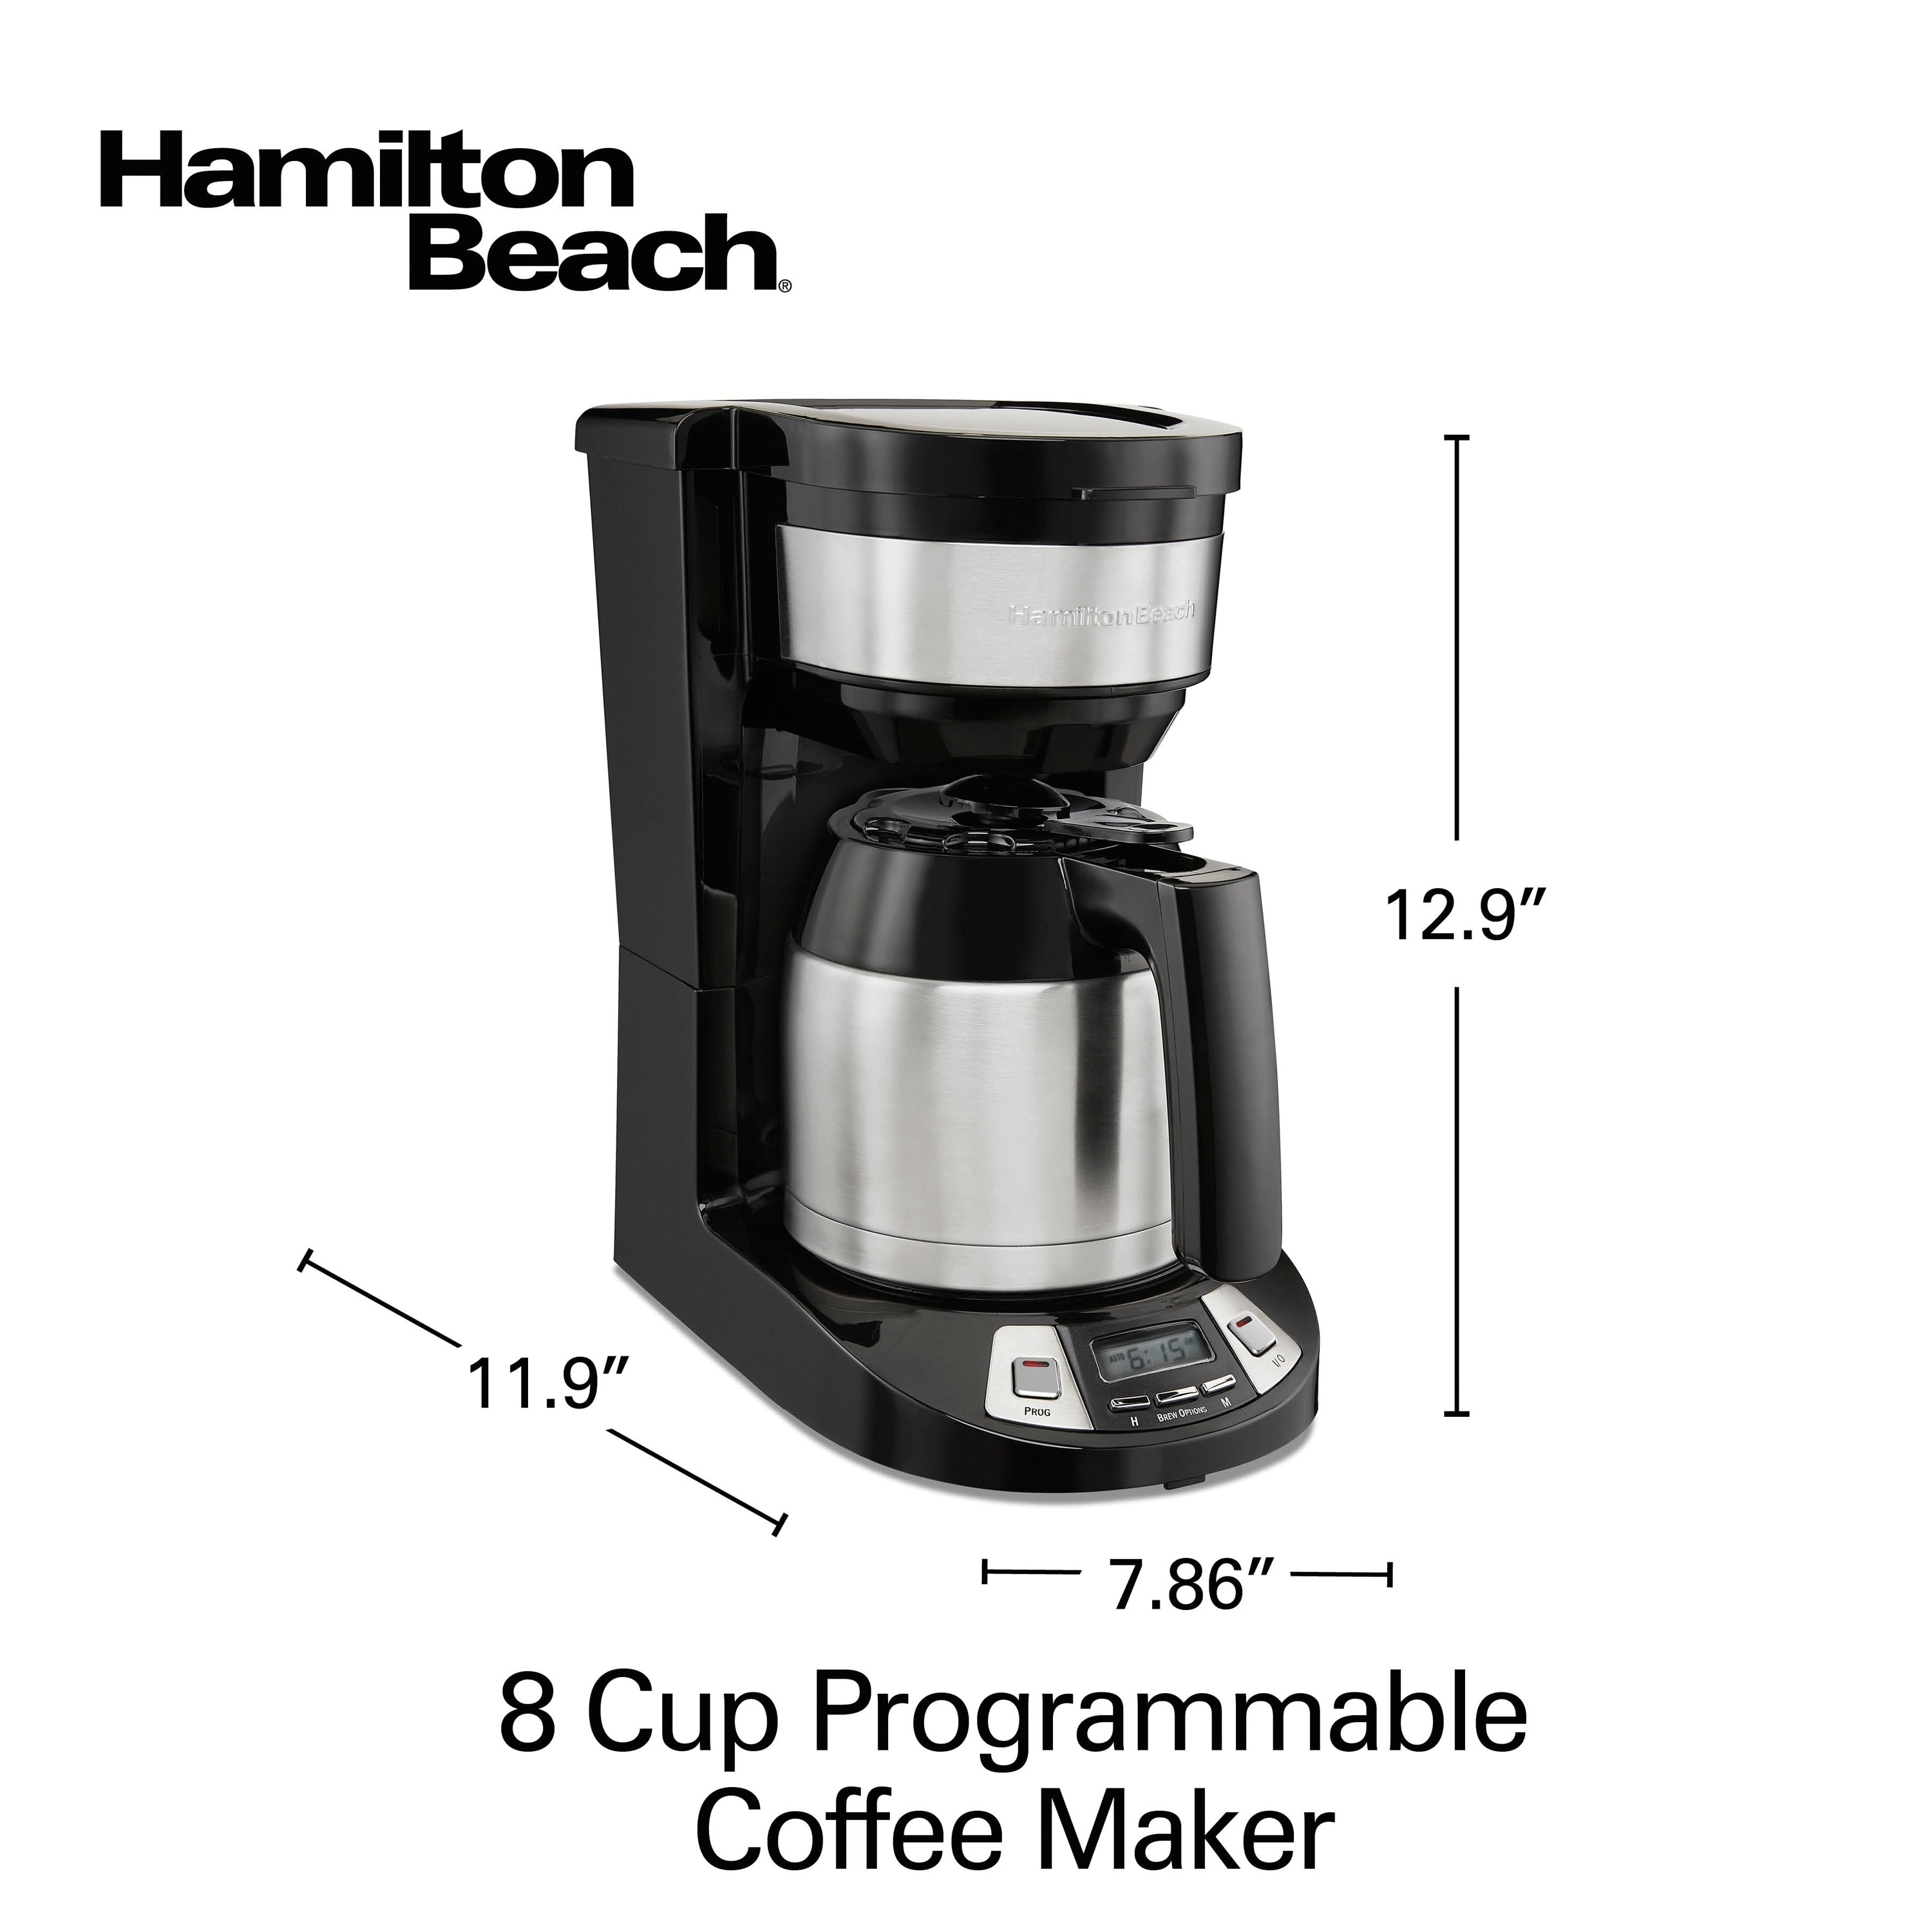 https://ak1.ostkcdn.com/images/products/30970355/Hamilton-Beach-8-Cup-Programmable-Coffee-Maker-with-Thermal-Carafe-5c742f9d-754f-4e33-9f83-e1a494181ca6.jpg